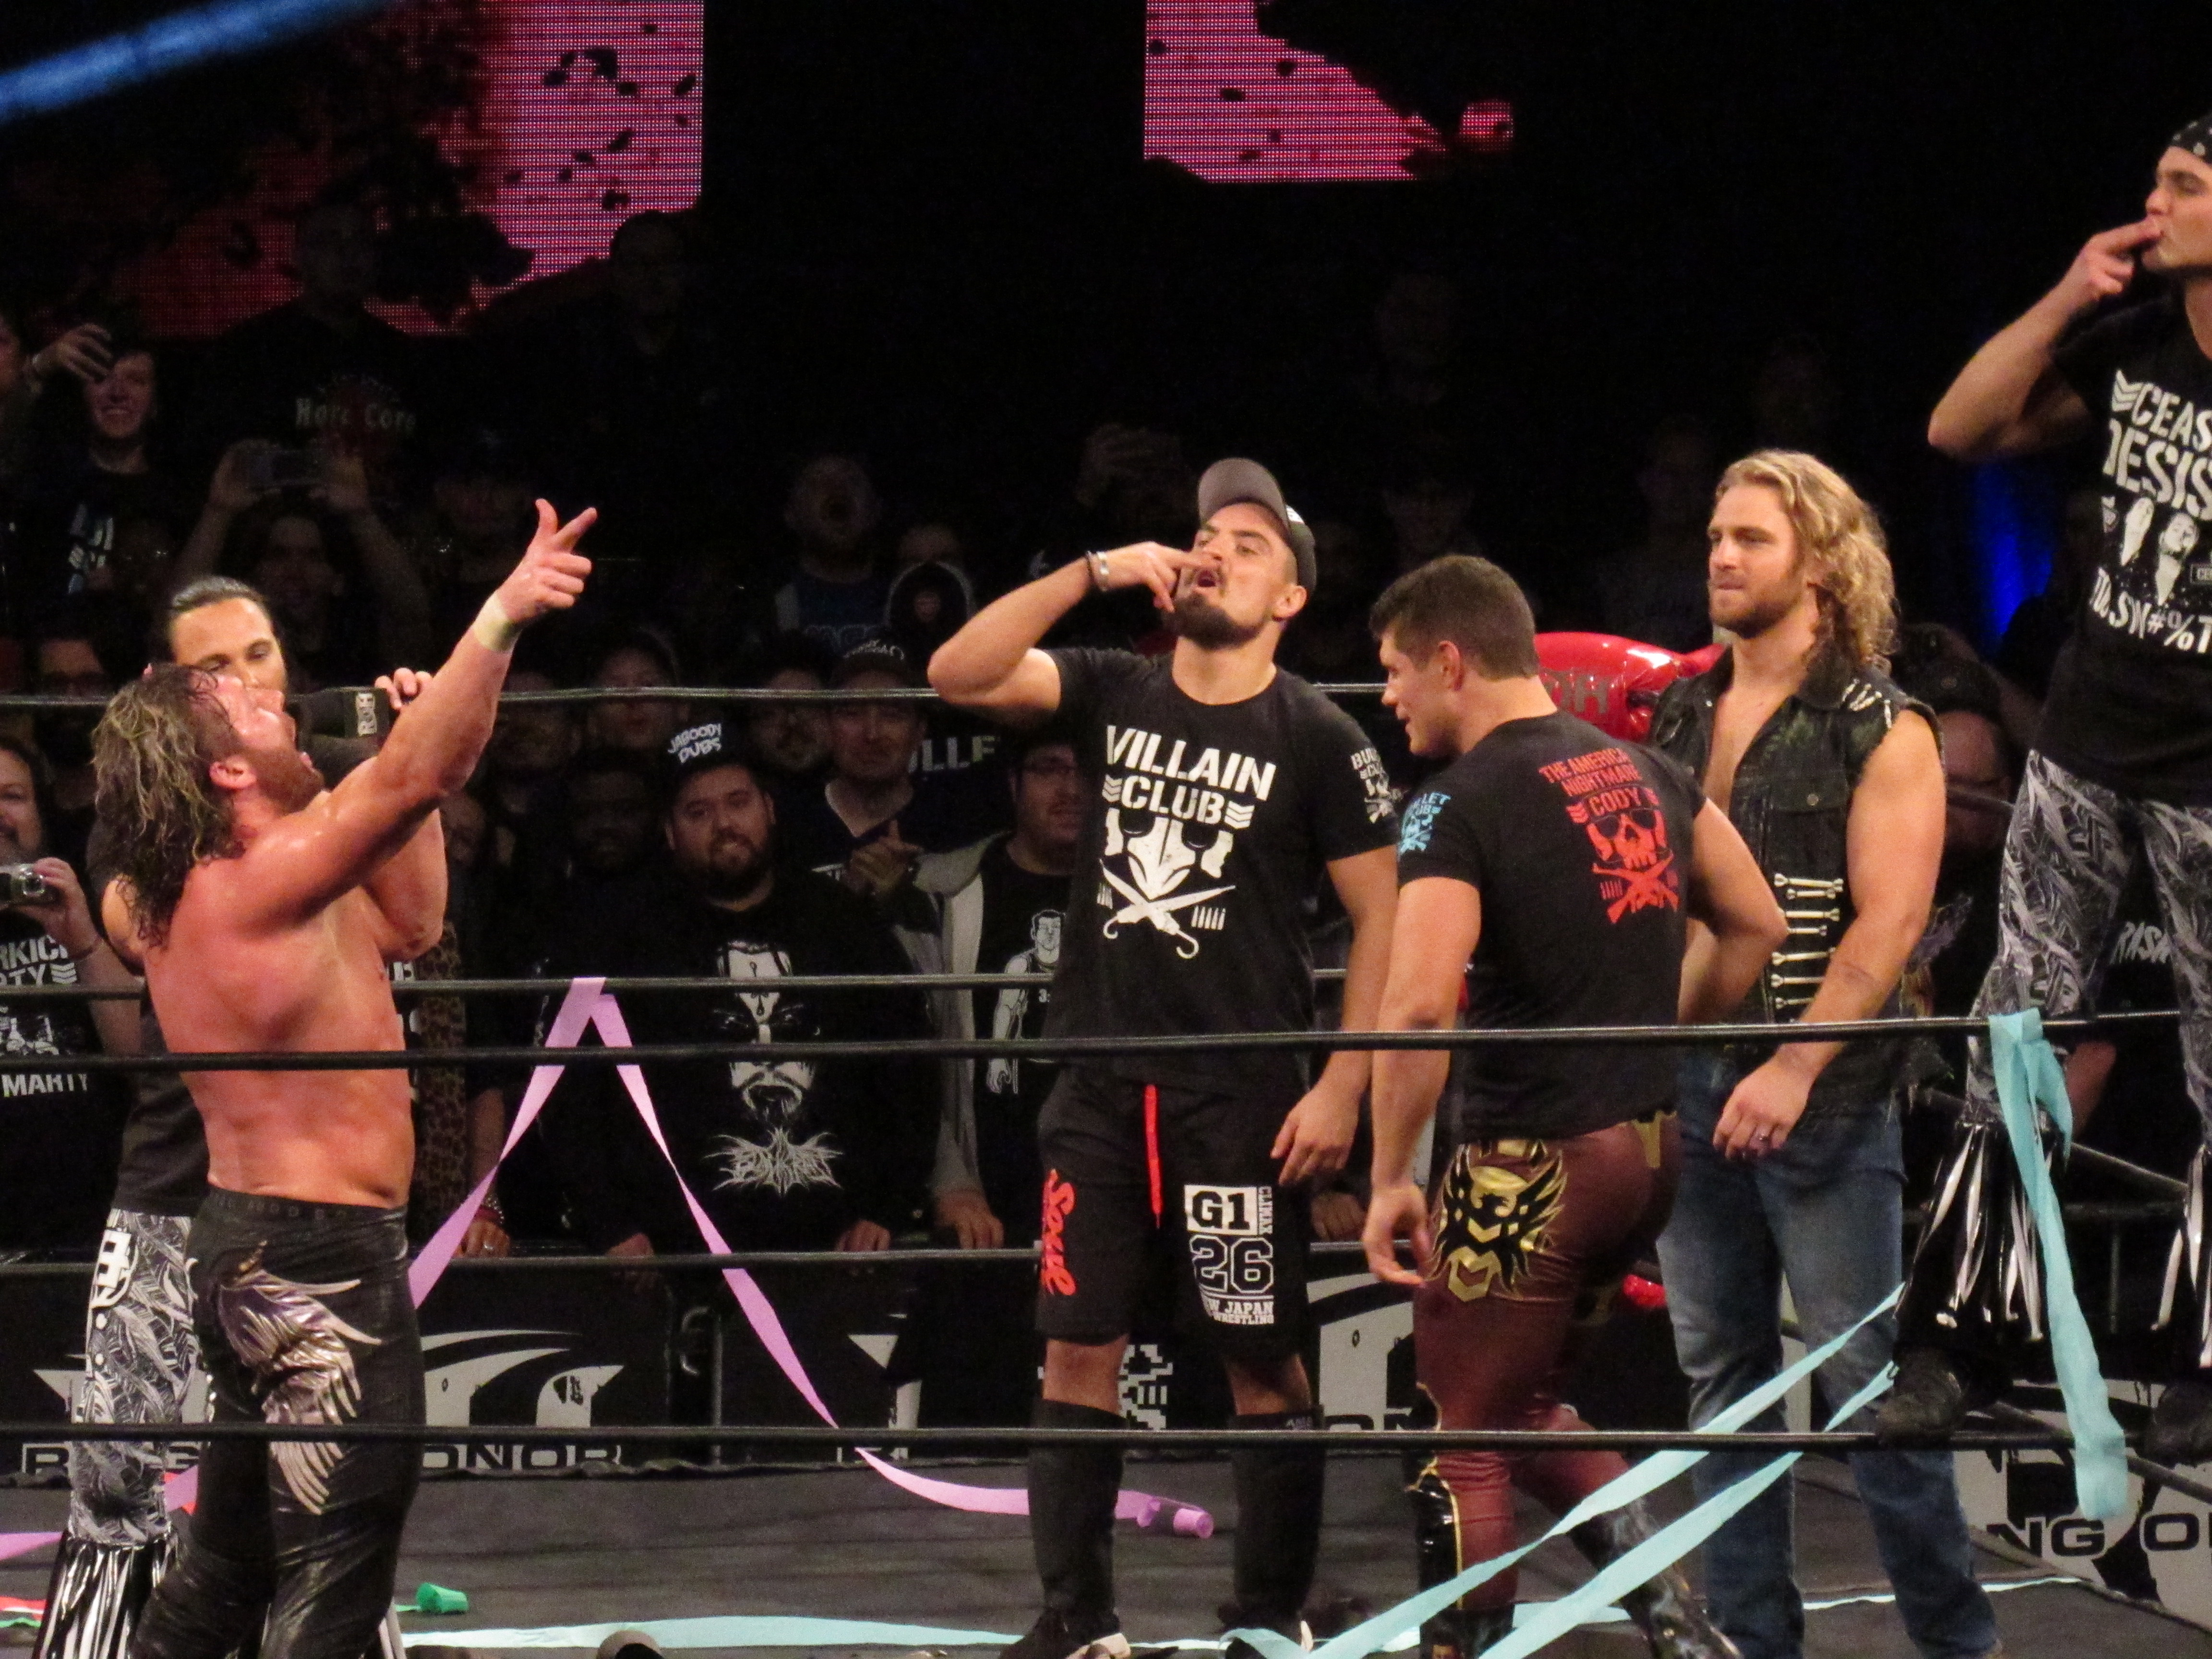 Being The Elite Ep 76: Where Do You Thing You’re Going? (Video), Scott Hall & Finlay Share A Birthday